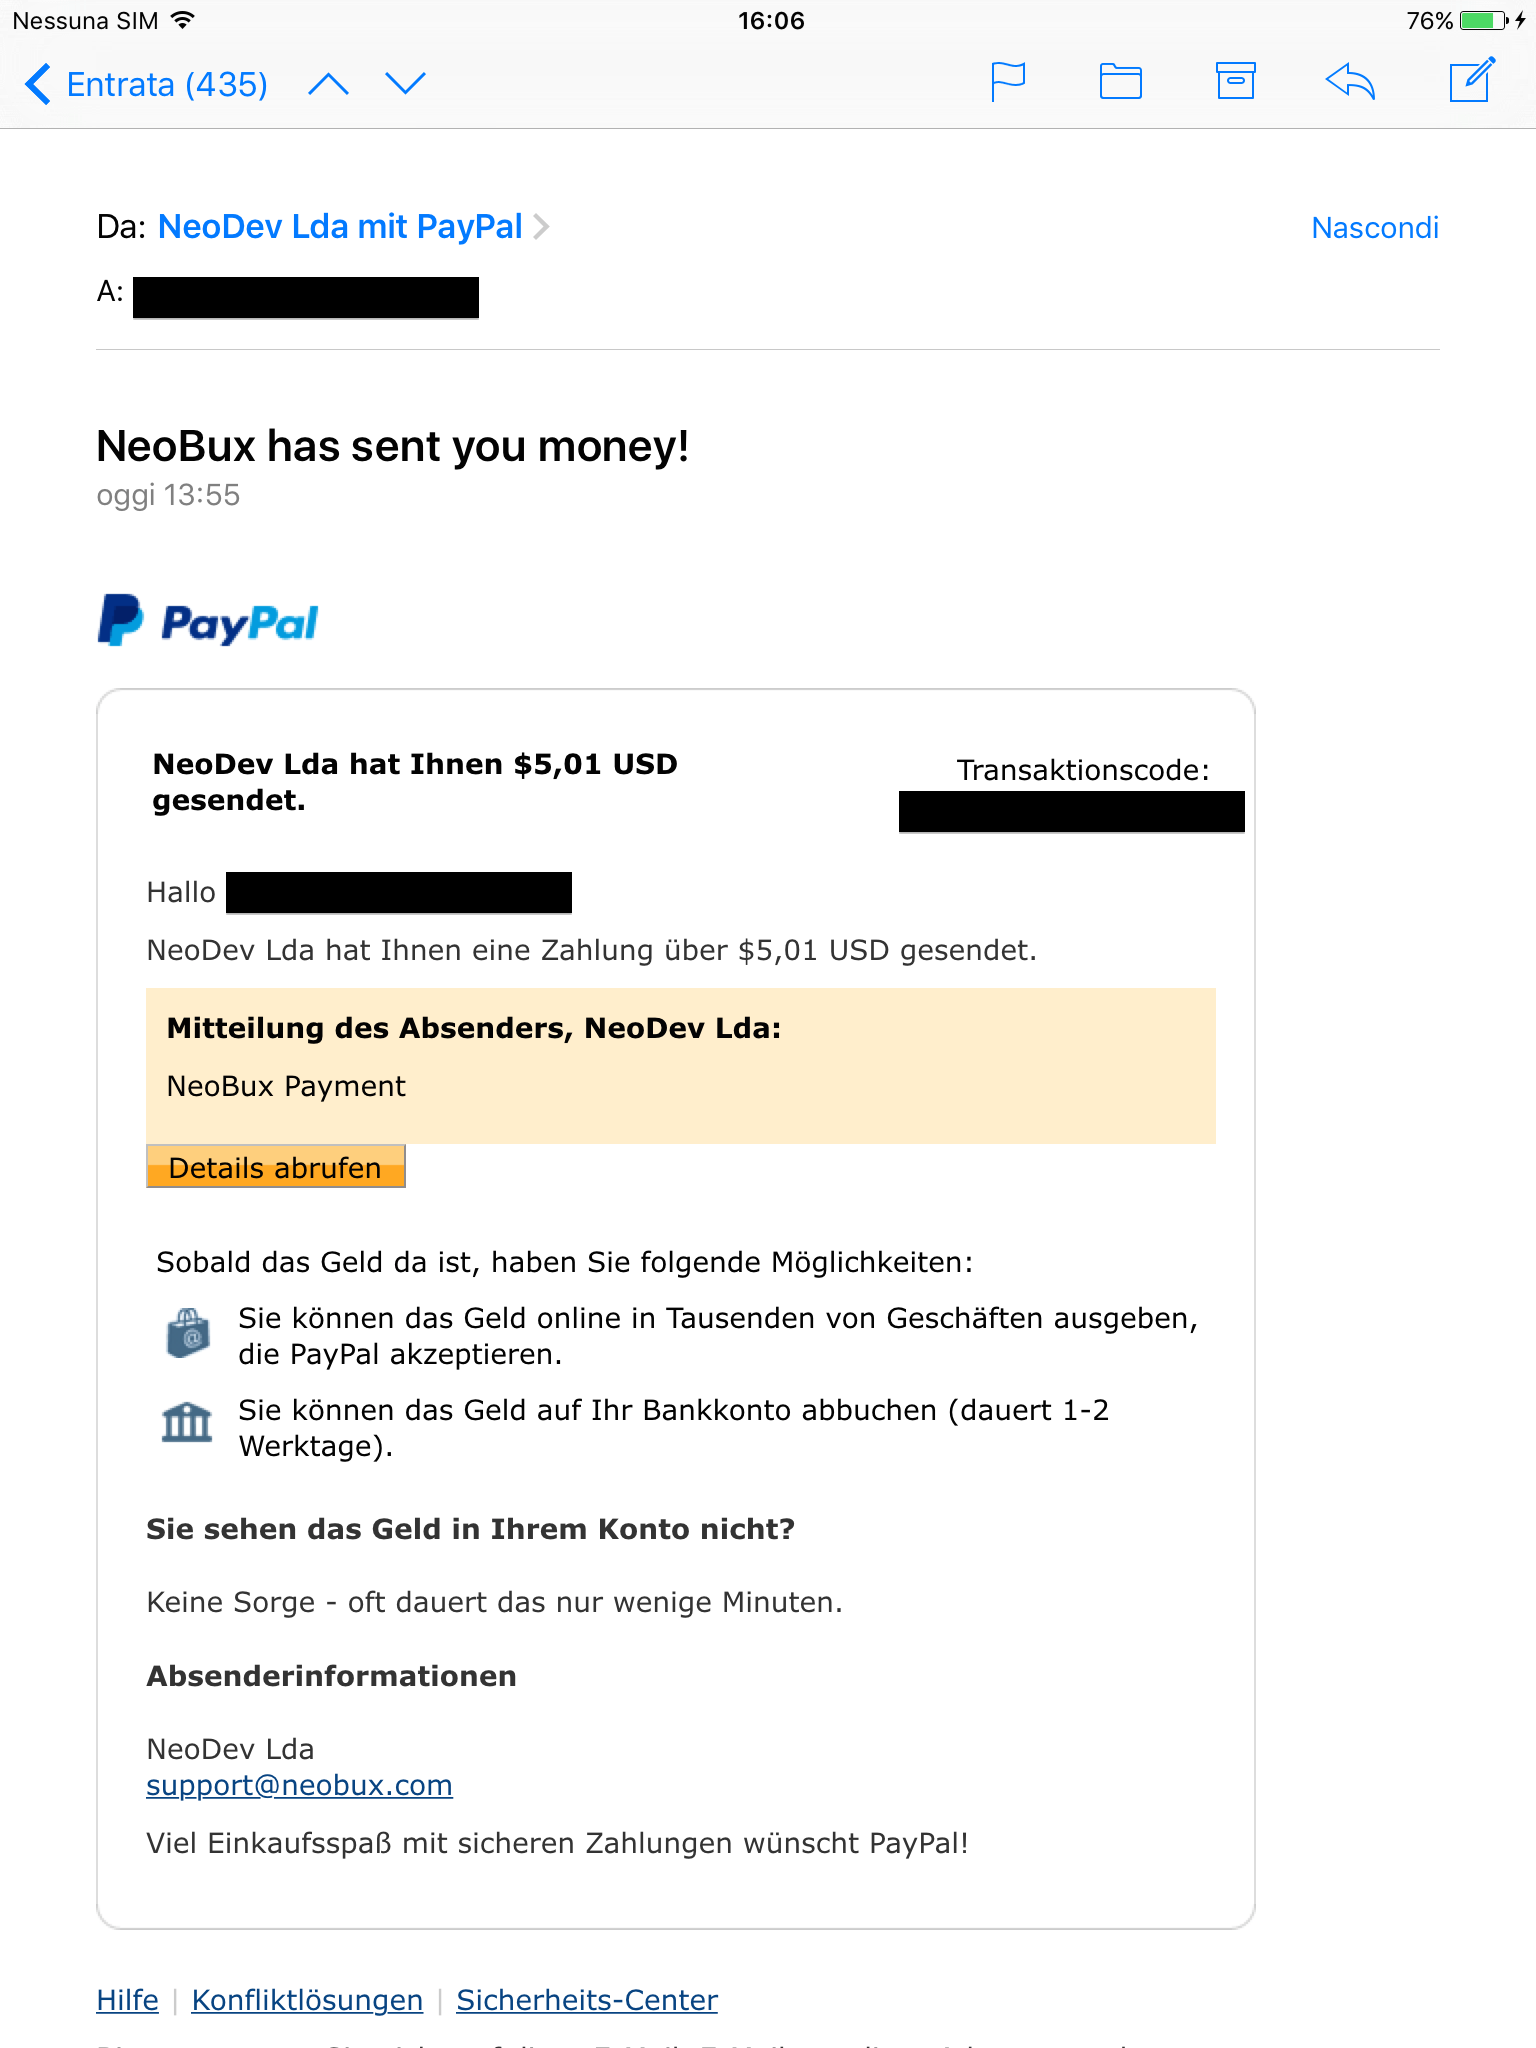 Payment 454 for Neobux